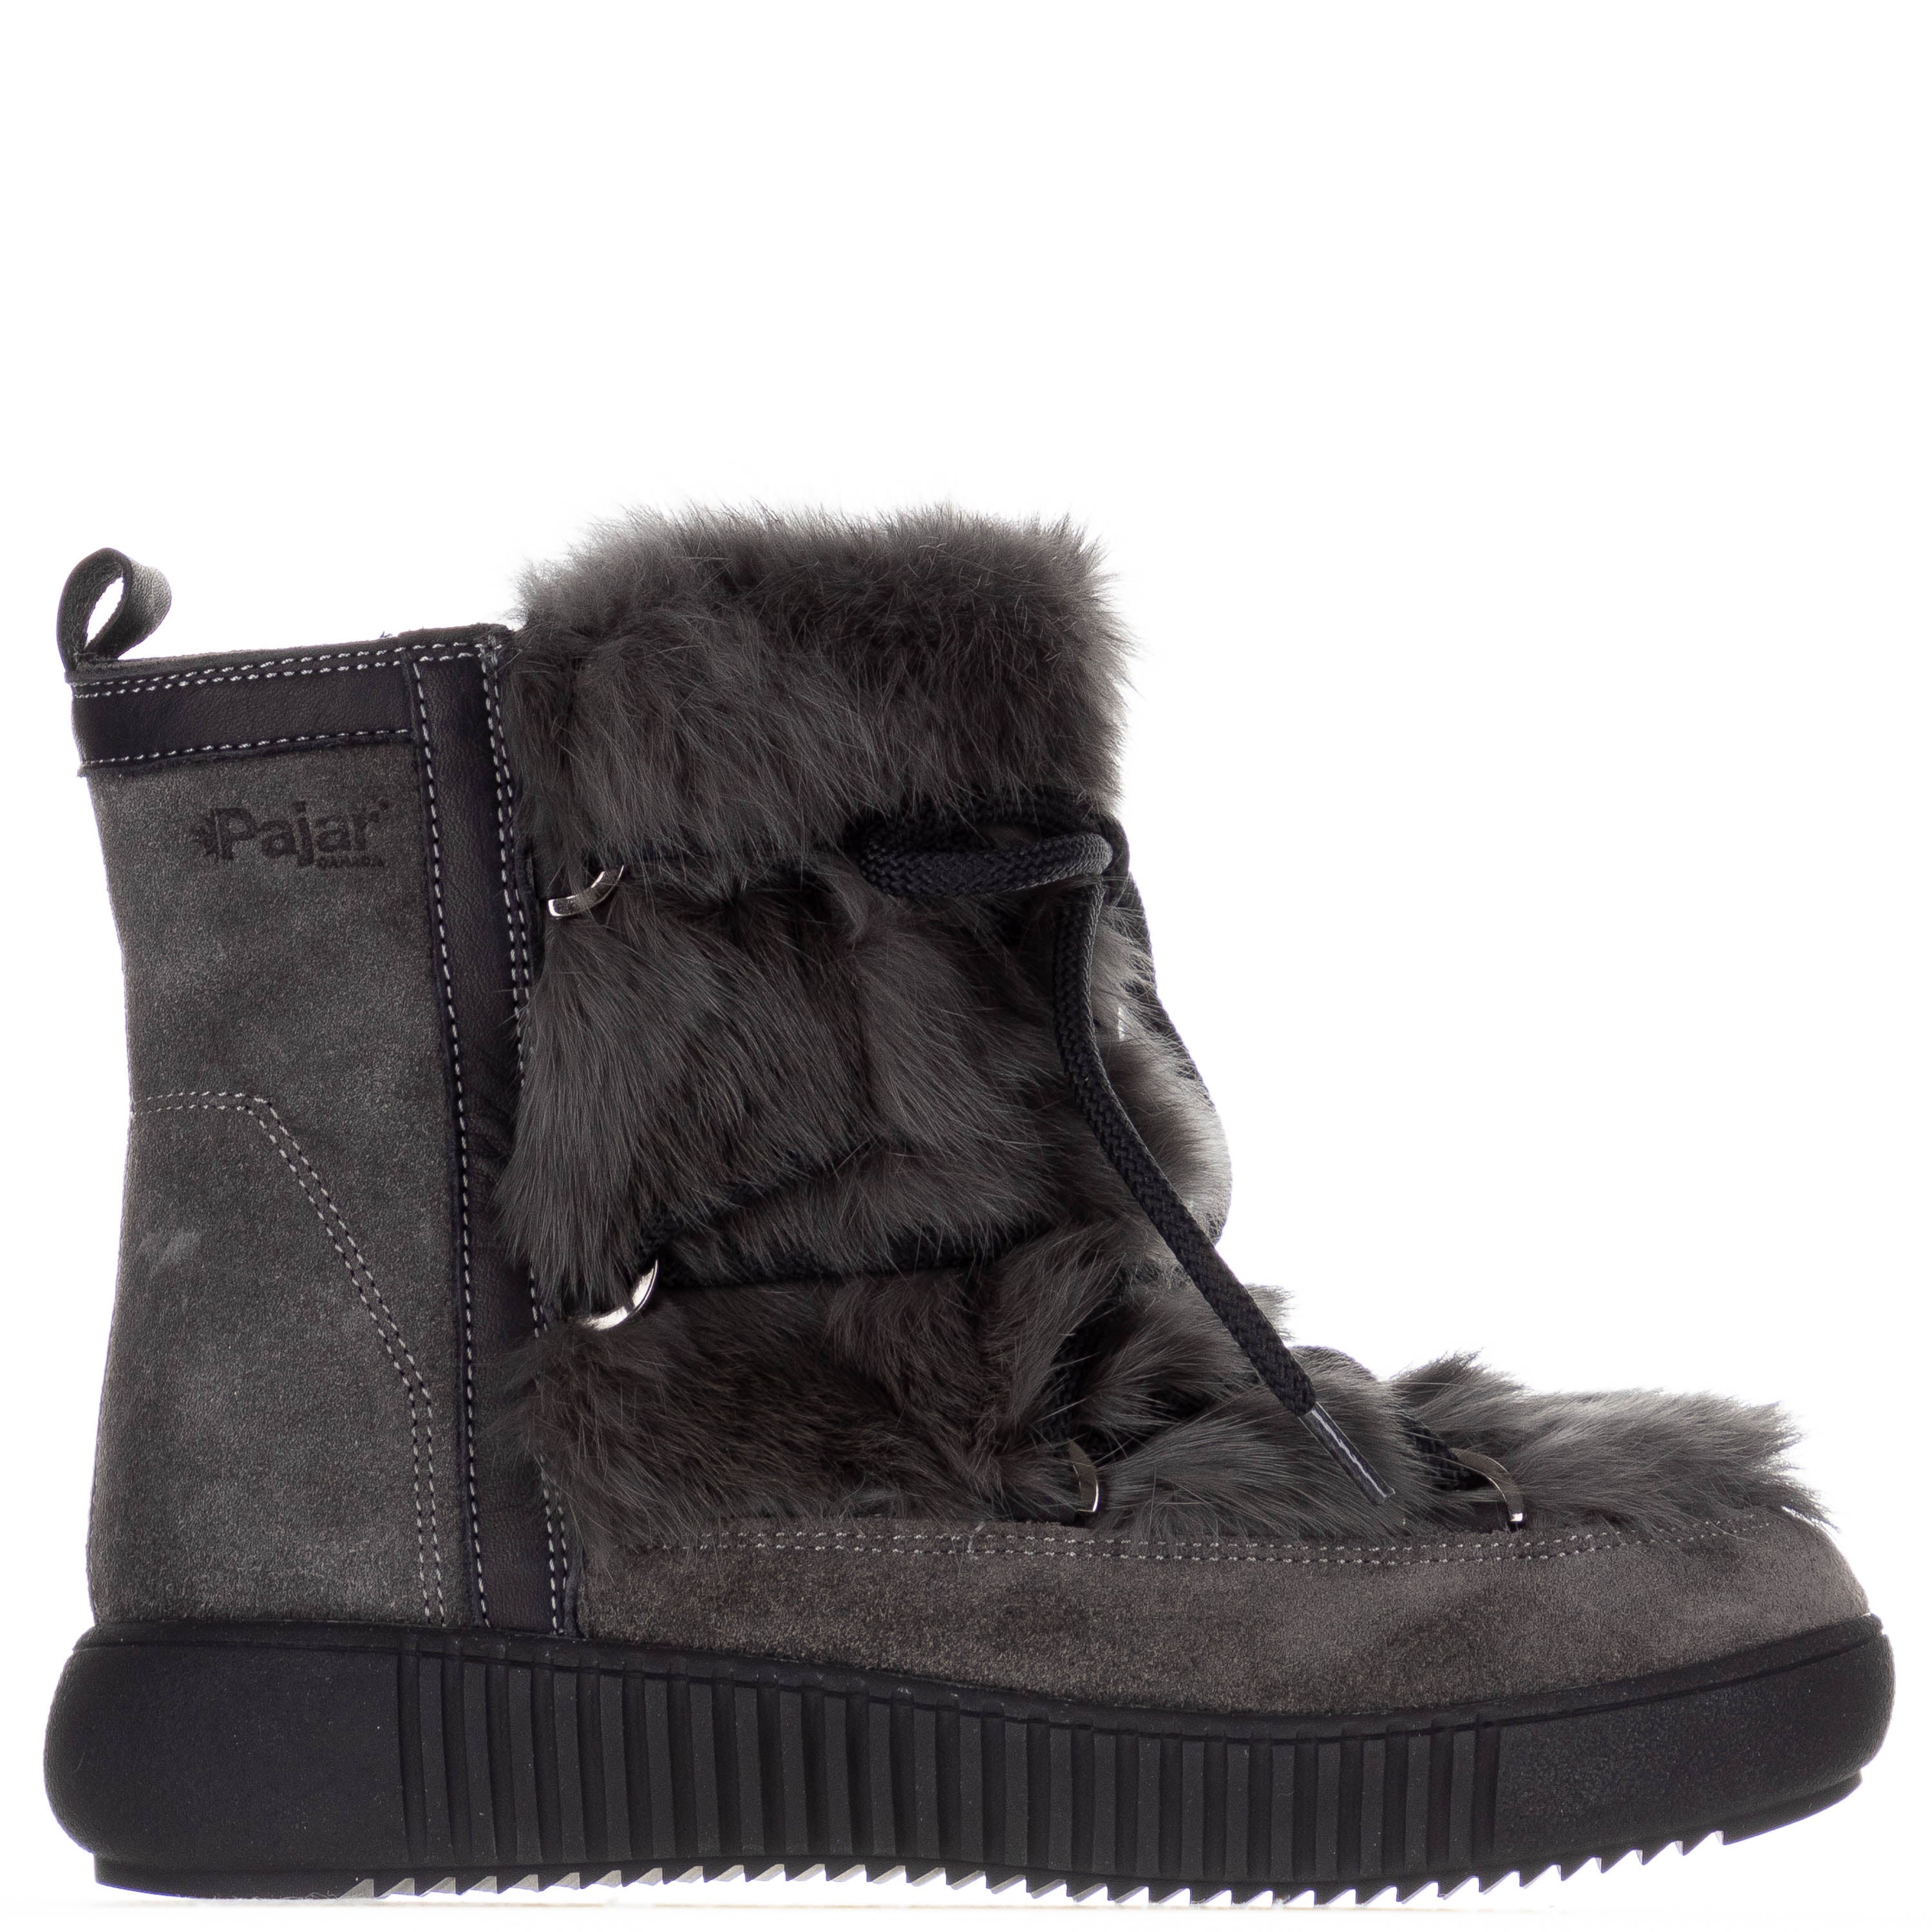 Anet Zip by Pajar in Charcoal Suede/Fur